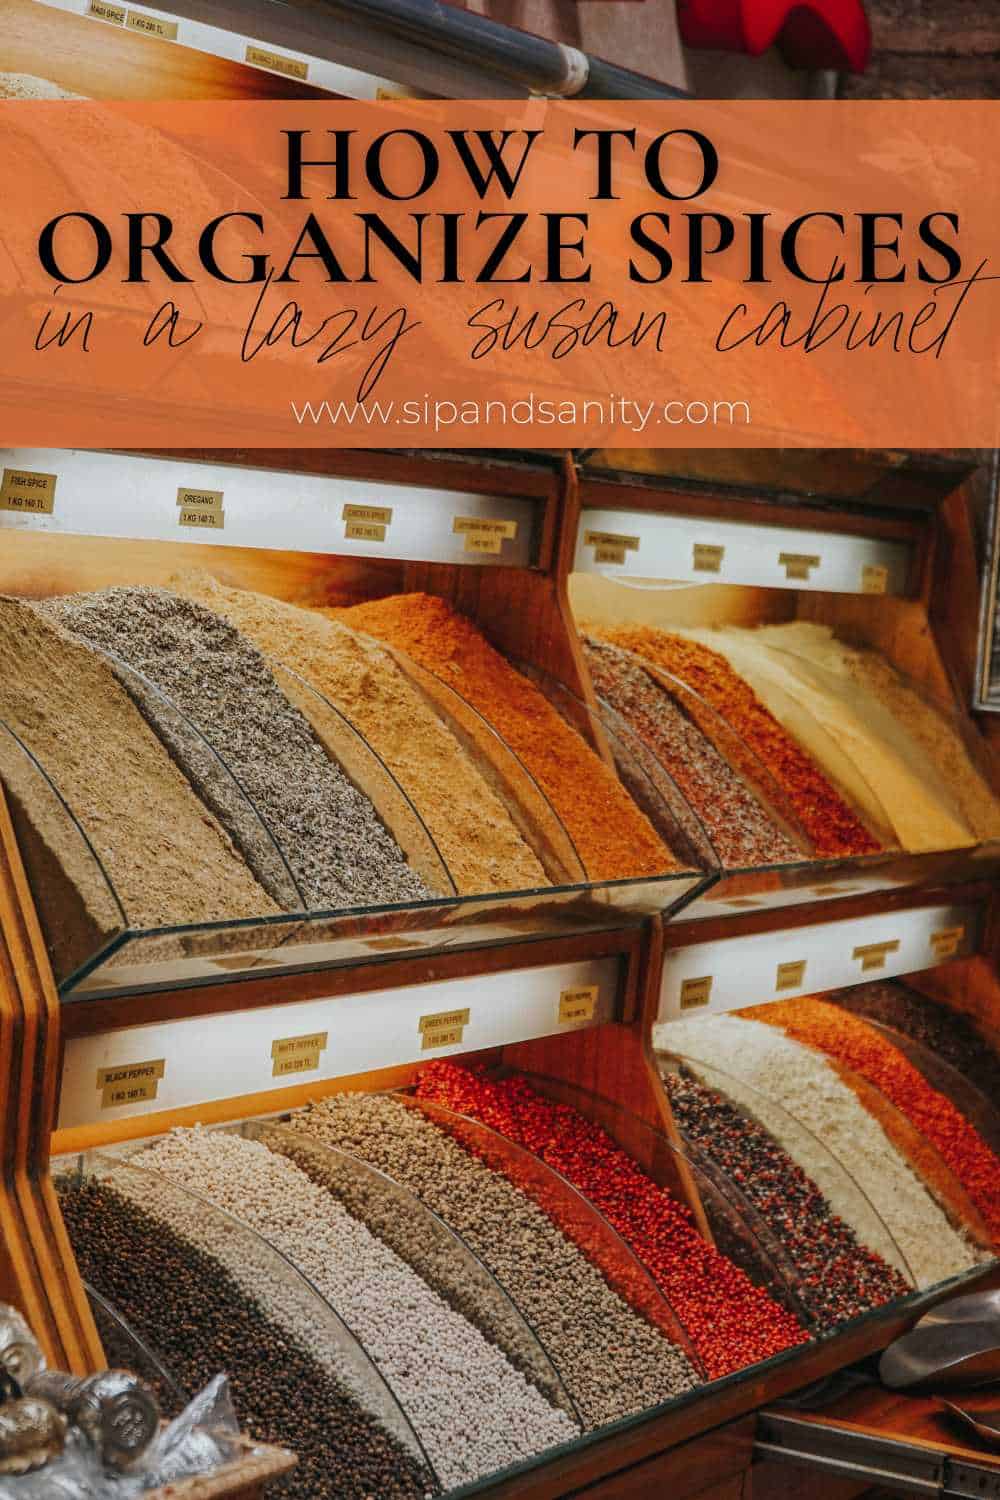 Pin image for how to organize spices in a lazy susan cabinet.